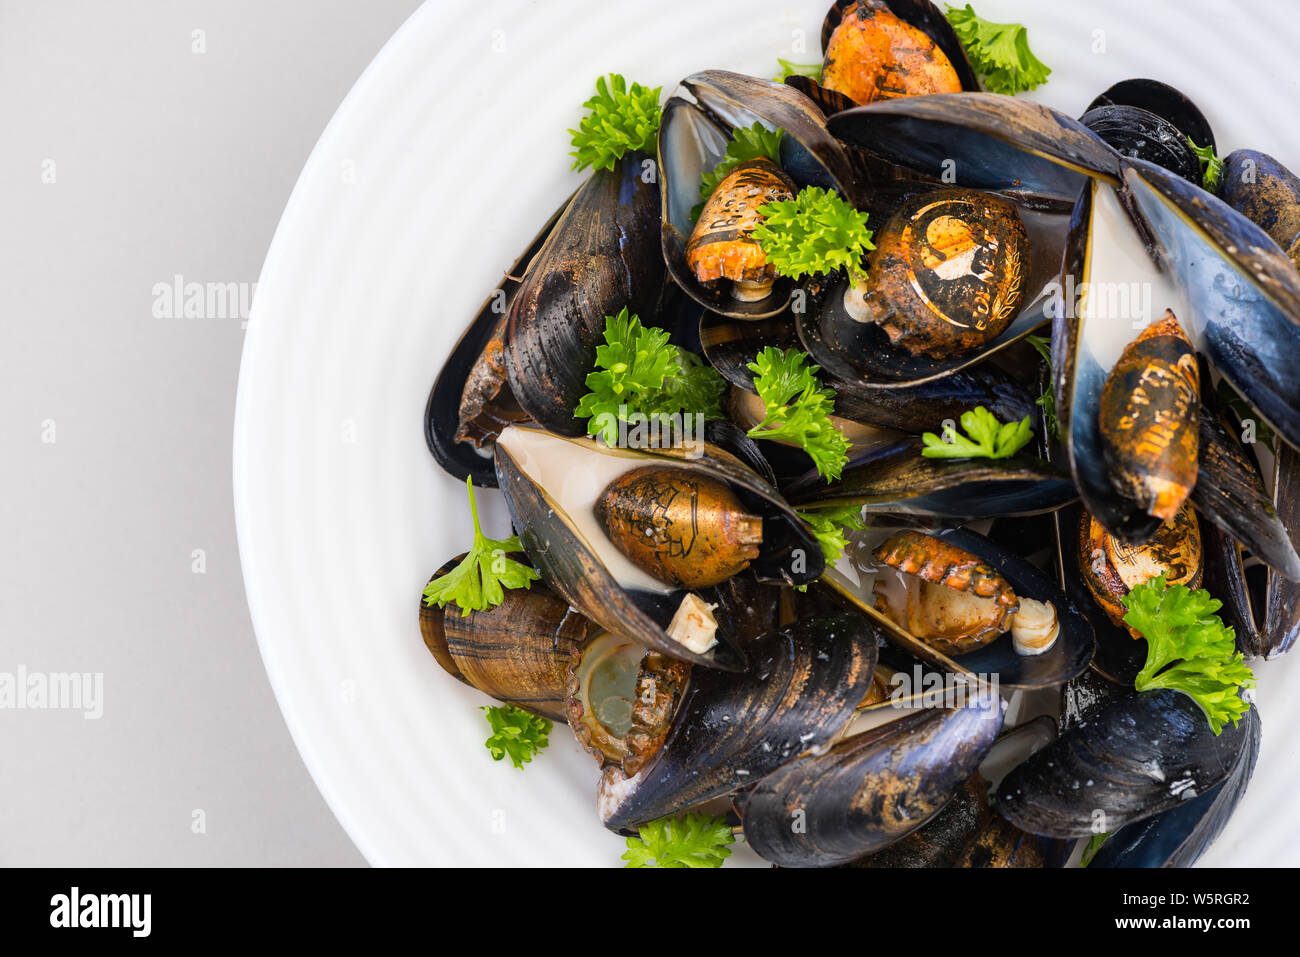 Ocean Pollution Concept, Contamined Seafood from Polluted Water. Stock Photo